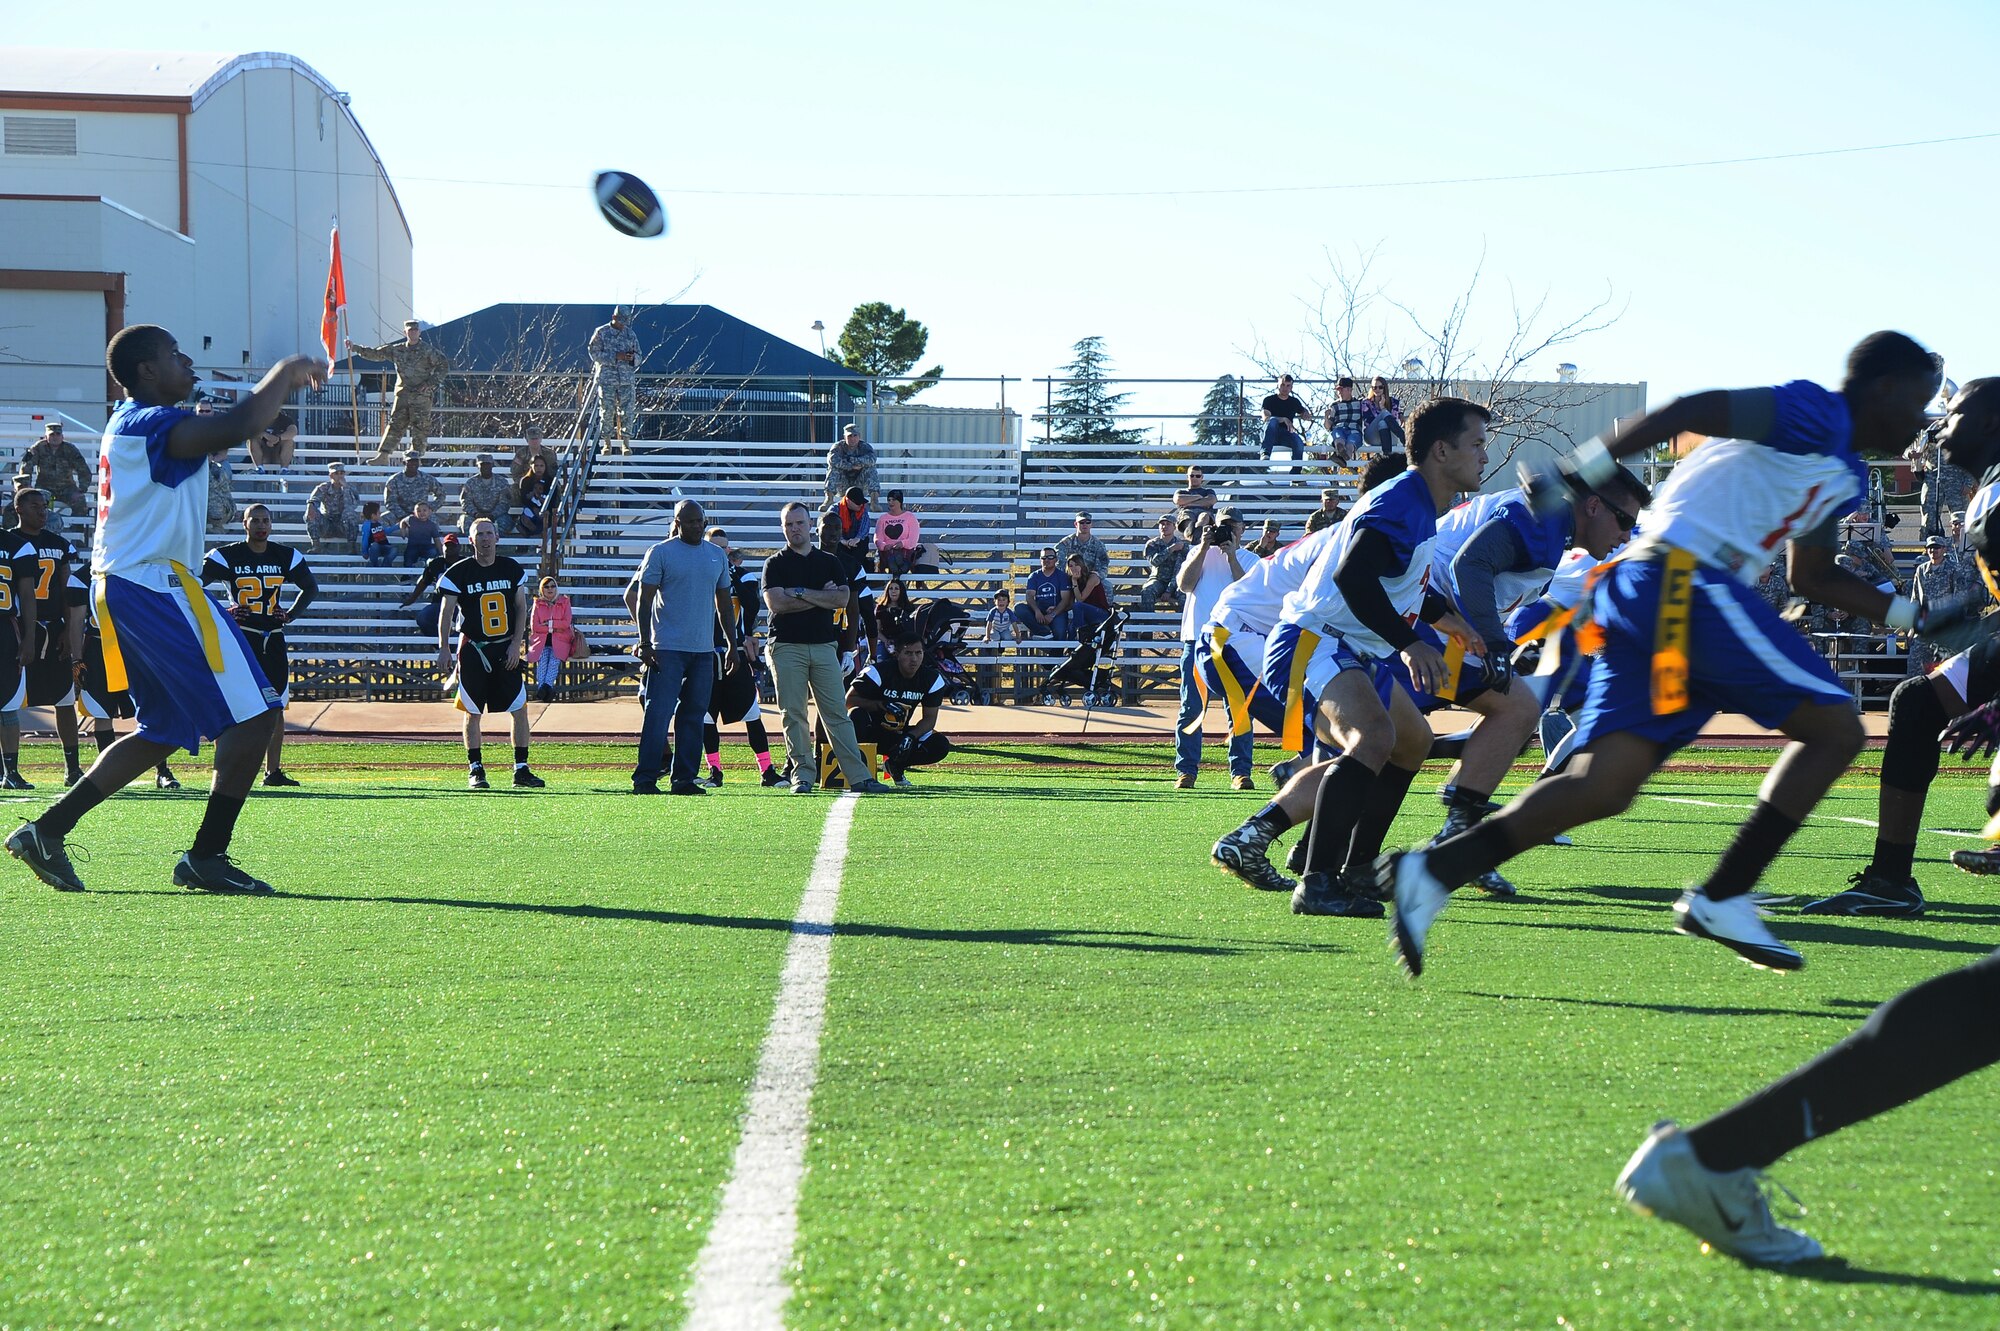 U.S. Air Force 2nd Lt. Allante Staten, Davis-Monthan Air Force Base Mustangs quarterback, receives a snap from the center during the Turkey Bowl 2015 at Fort Huachuca, Ariz., Nov. 20, 2015. The Turkey Bowl 2015 was the second game between D-M AFB and Fort Huachuca. (U.S. Air Force Airman 1st Class Mya M. Crosby/Released)